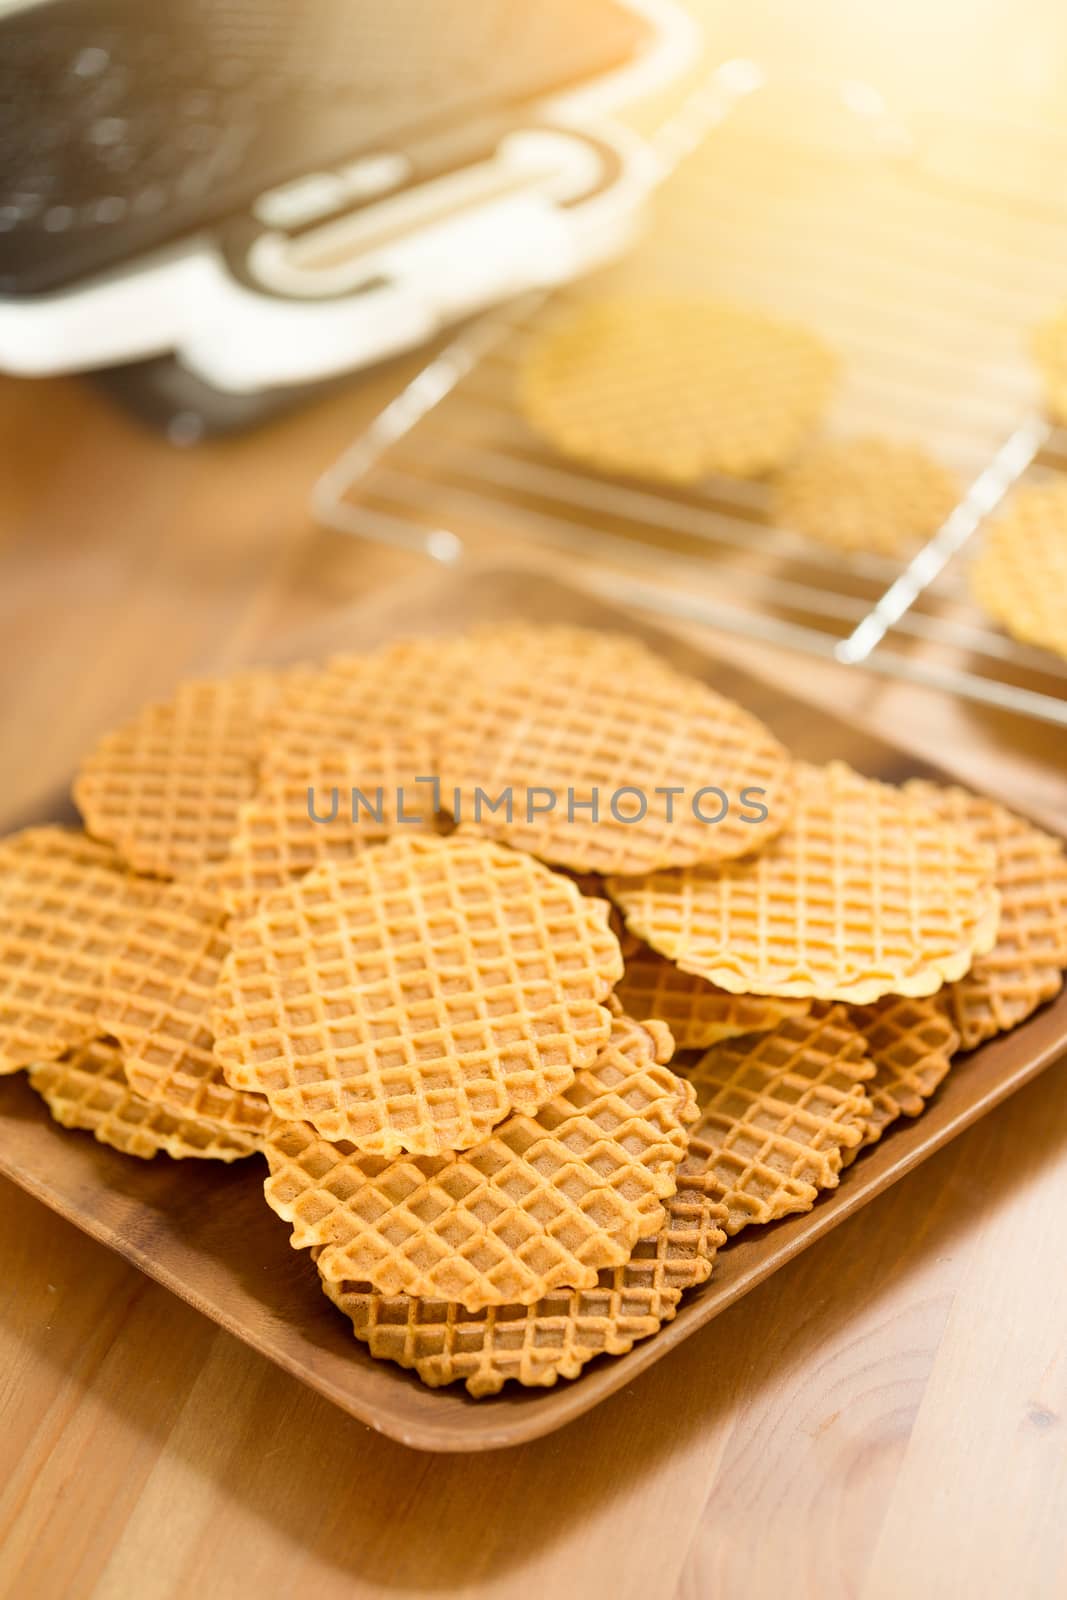 Italian pizzelle holiday cookies